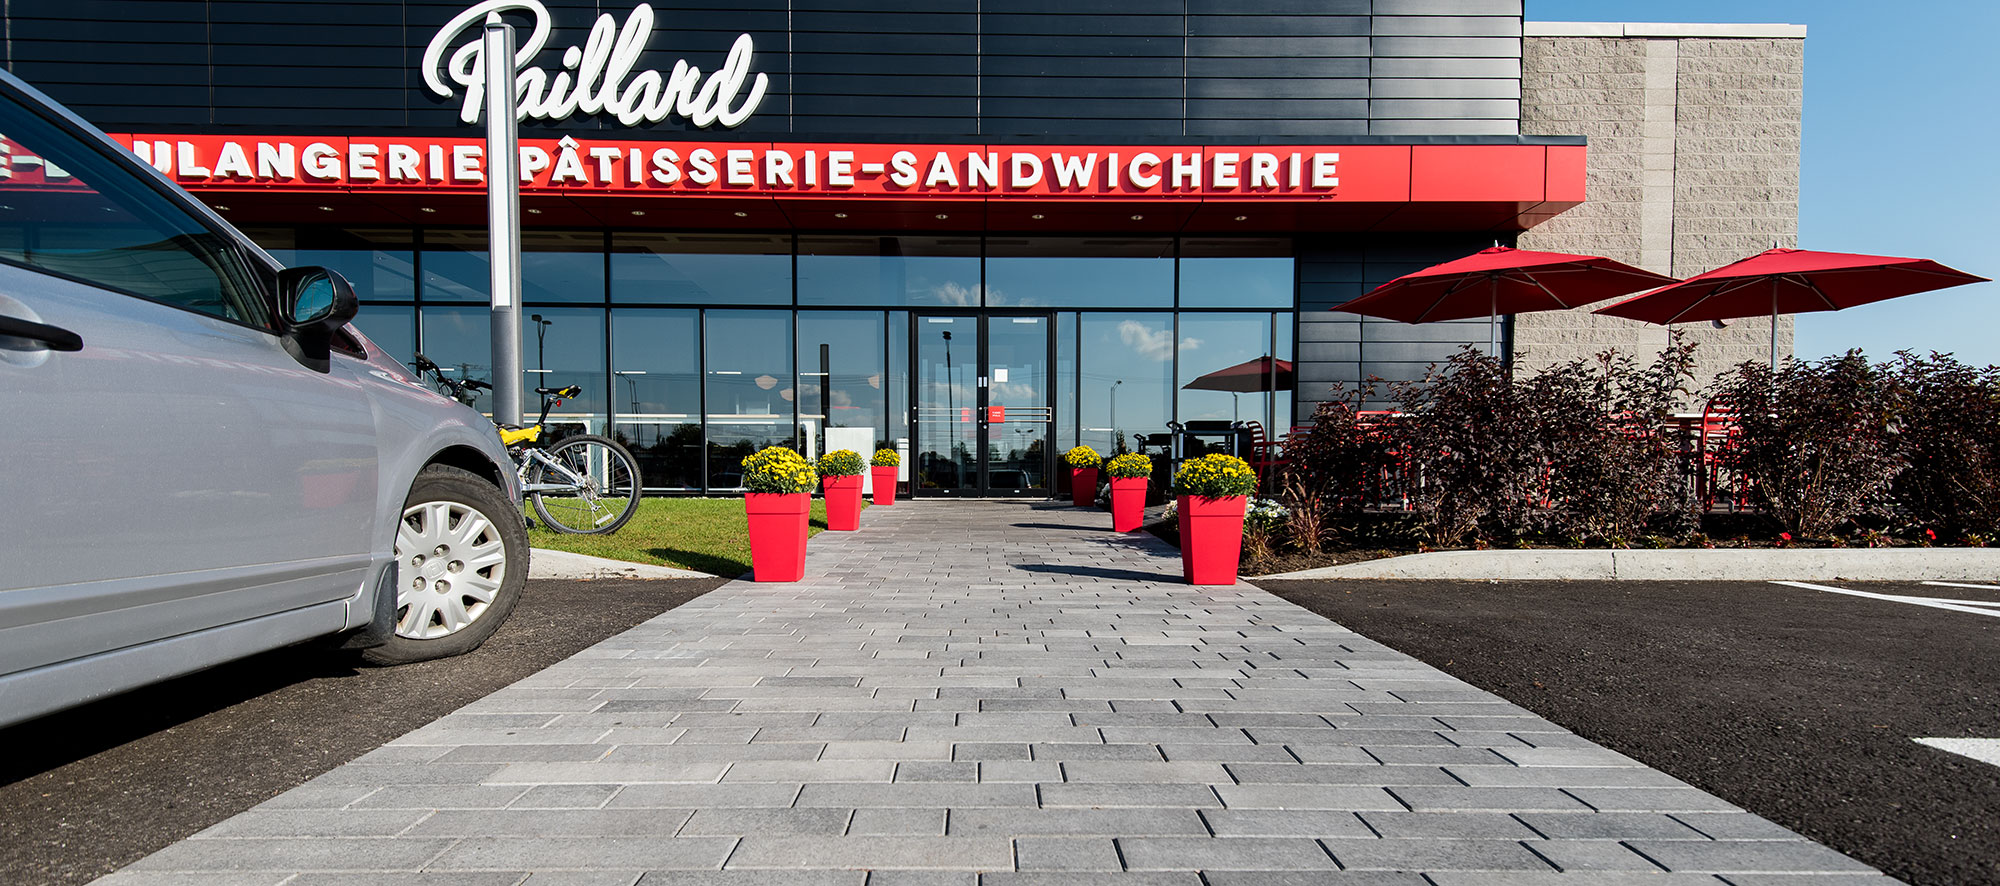 A café entrance includes gardens, red umbrellas, flowers in red planters, and a walkway of Artline pavers with a mottled Umbriano finish.